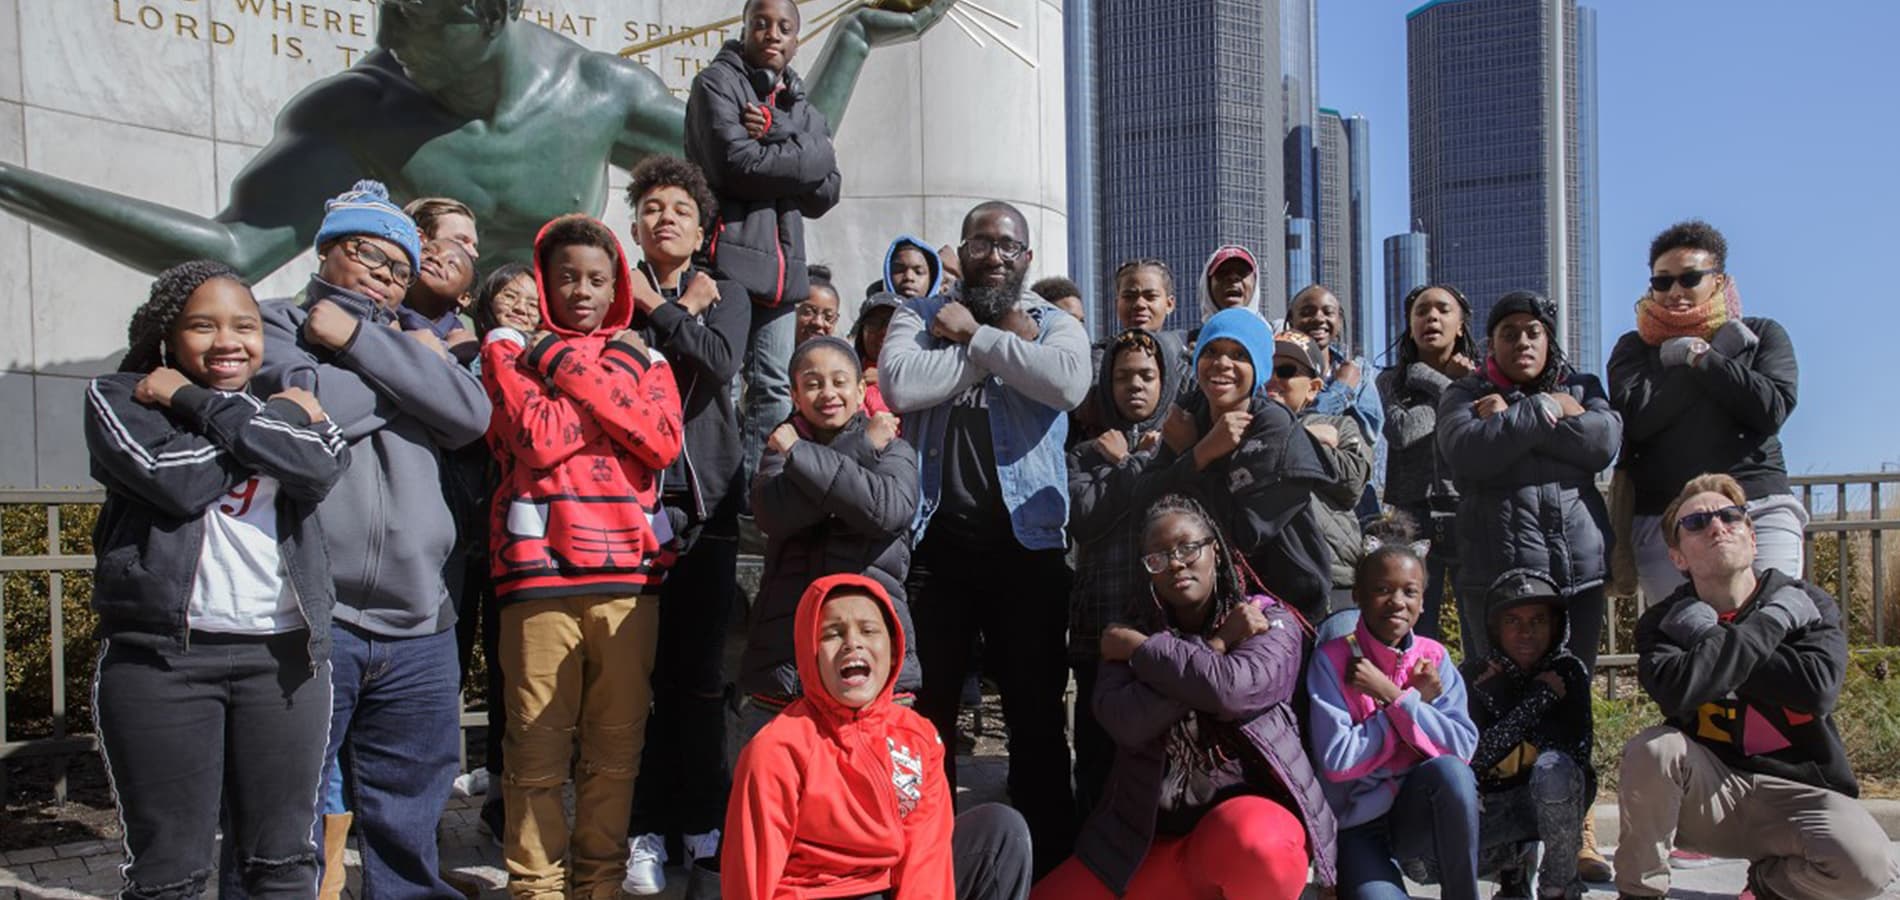 Michael Ford stands outdoors in front of an iconic statue in downtown ɫۺϾþ, surrounded by more than a dozen children in sweatshirts and coats.